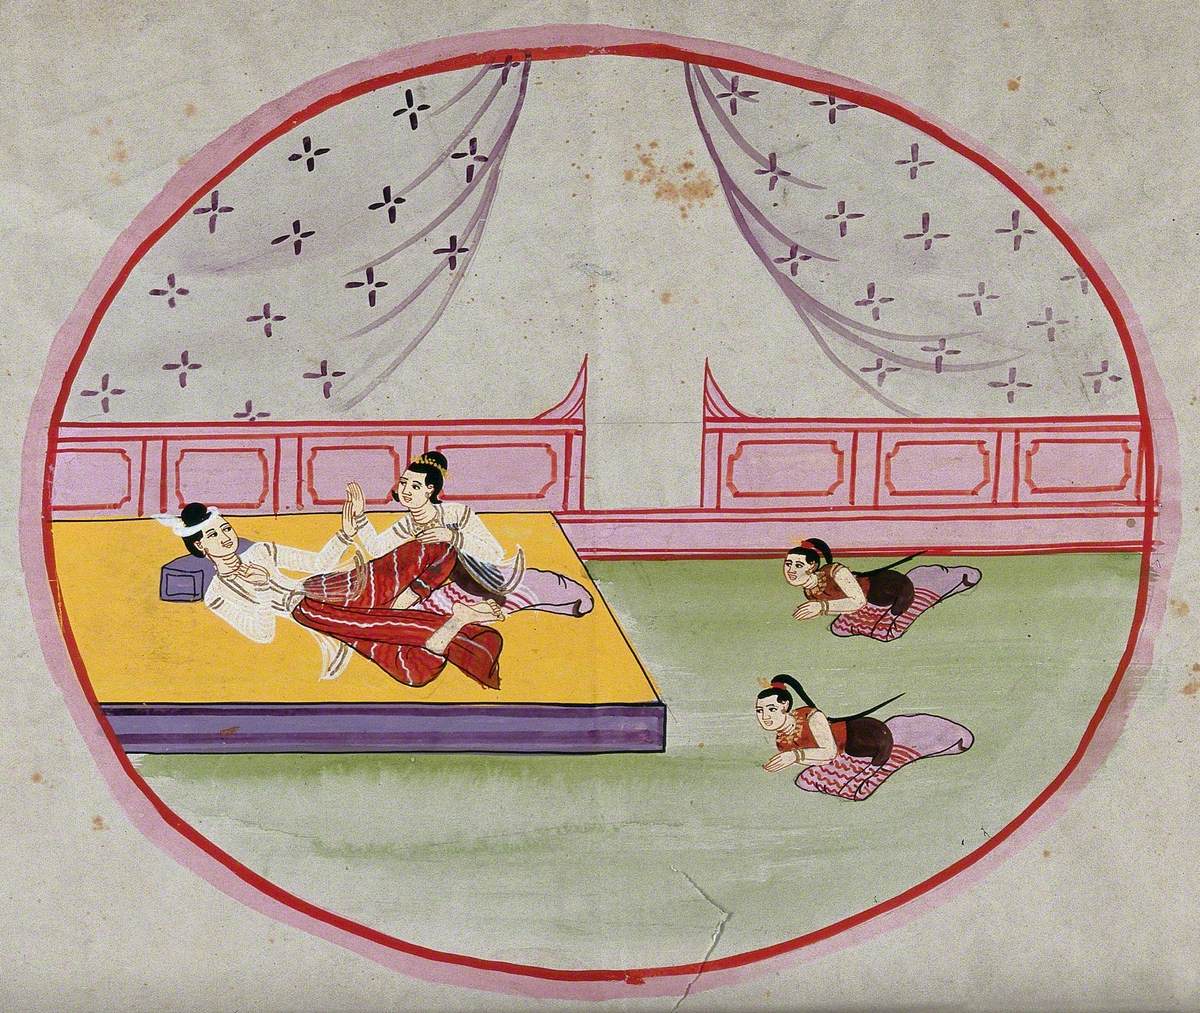 Two Figures Reclining on a Bed in a Palace while Two Servants Pay Homage, Burma